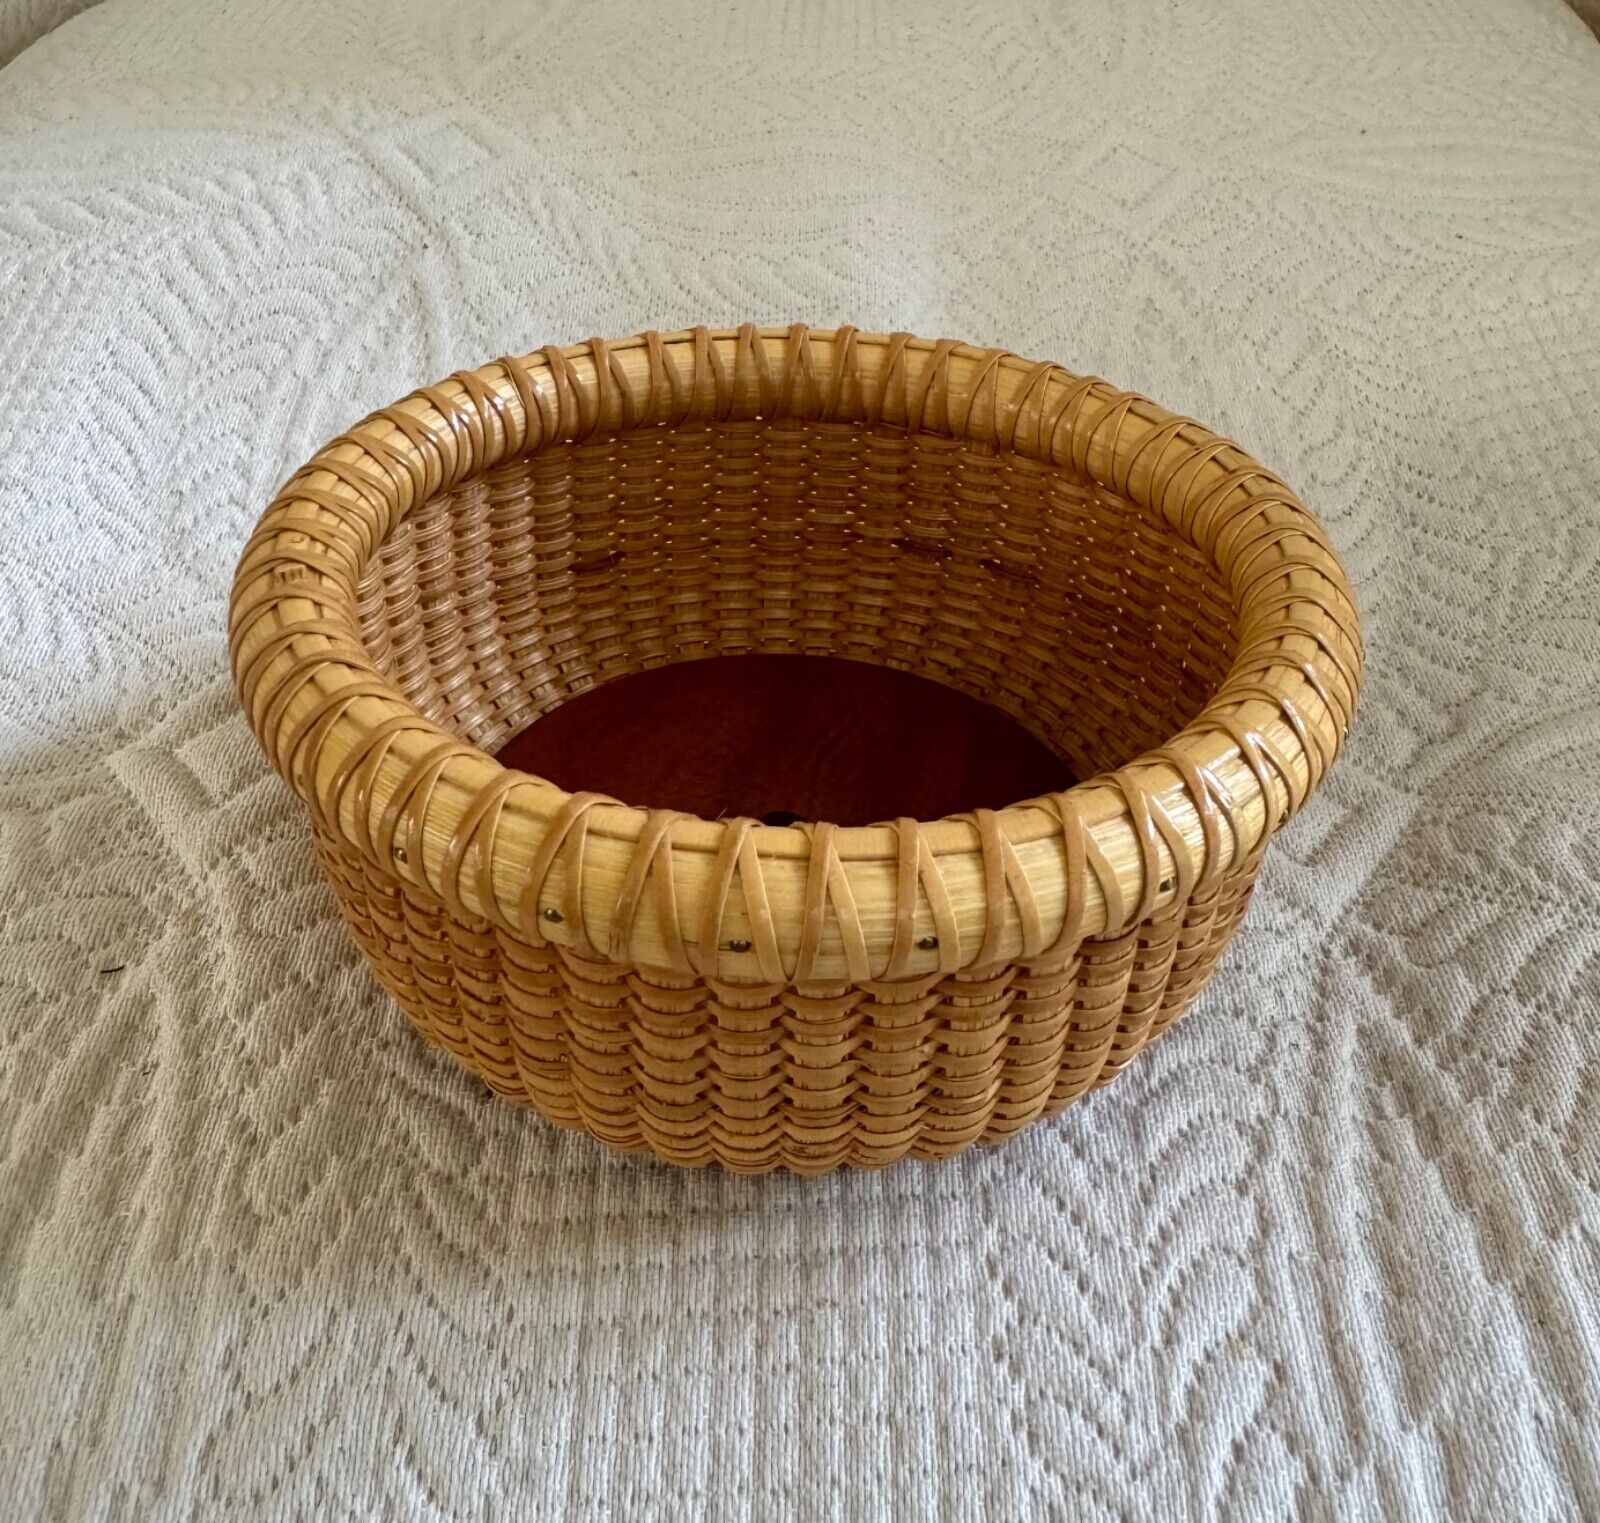 AUTHENTIC NANTUCKET ROUND MINI BASKET SIGNED LARRY BREWSTER, 1999